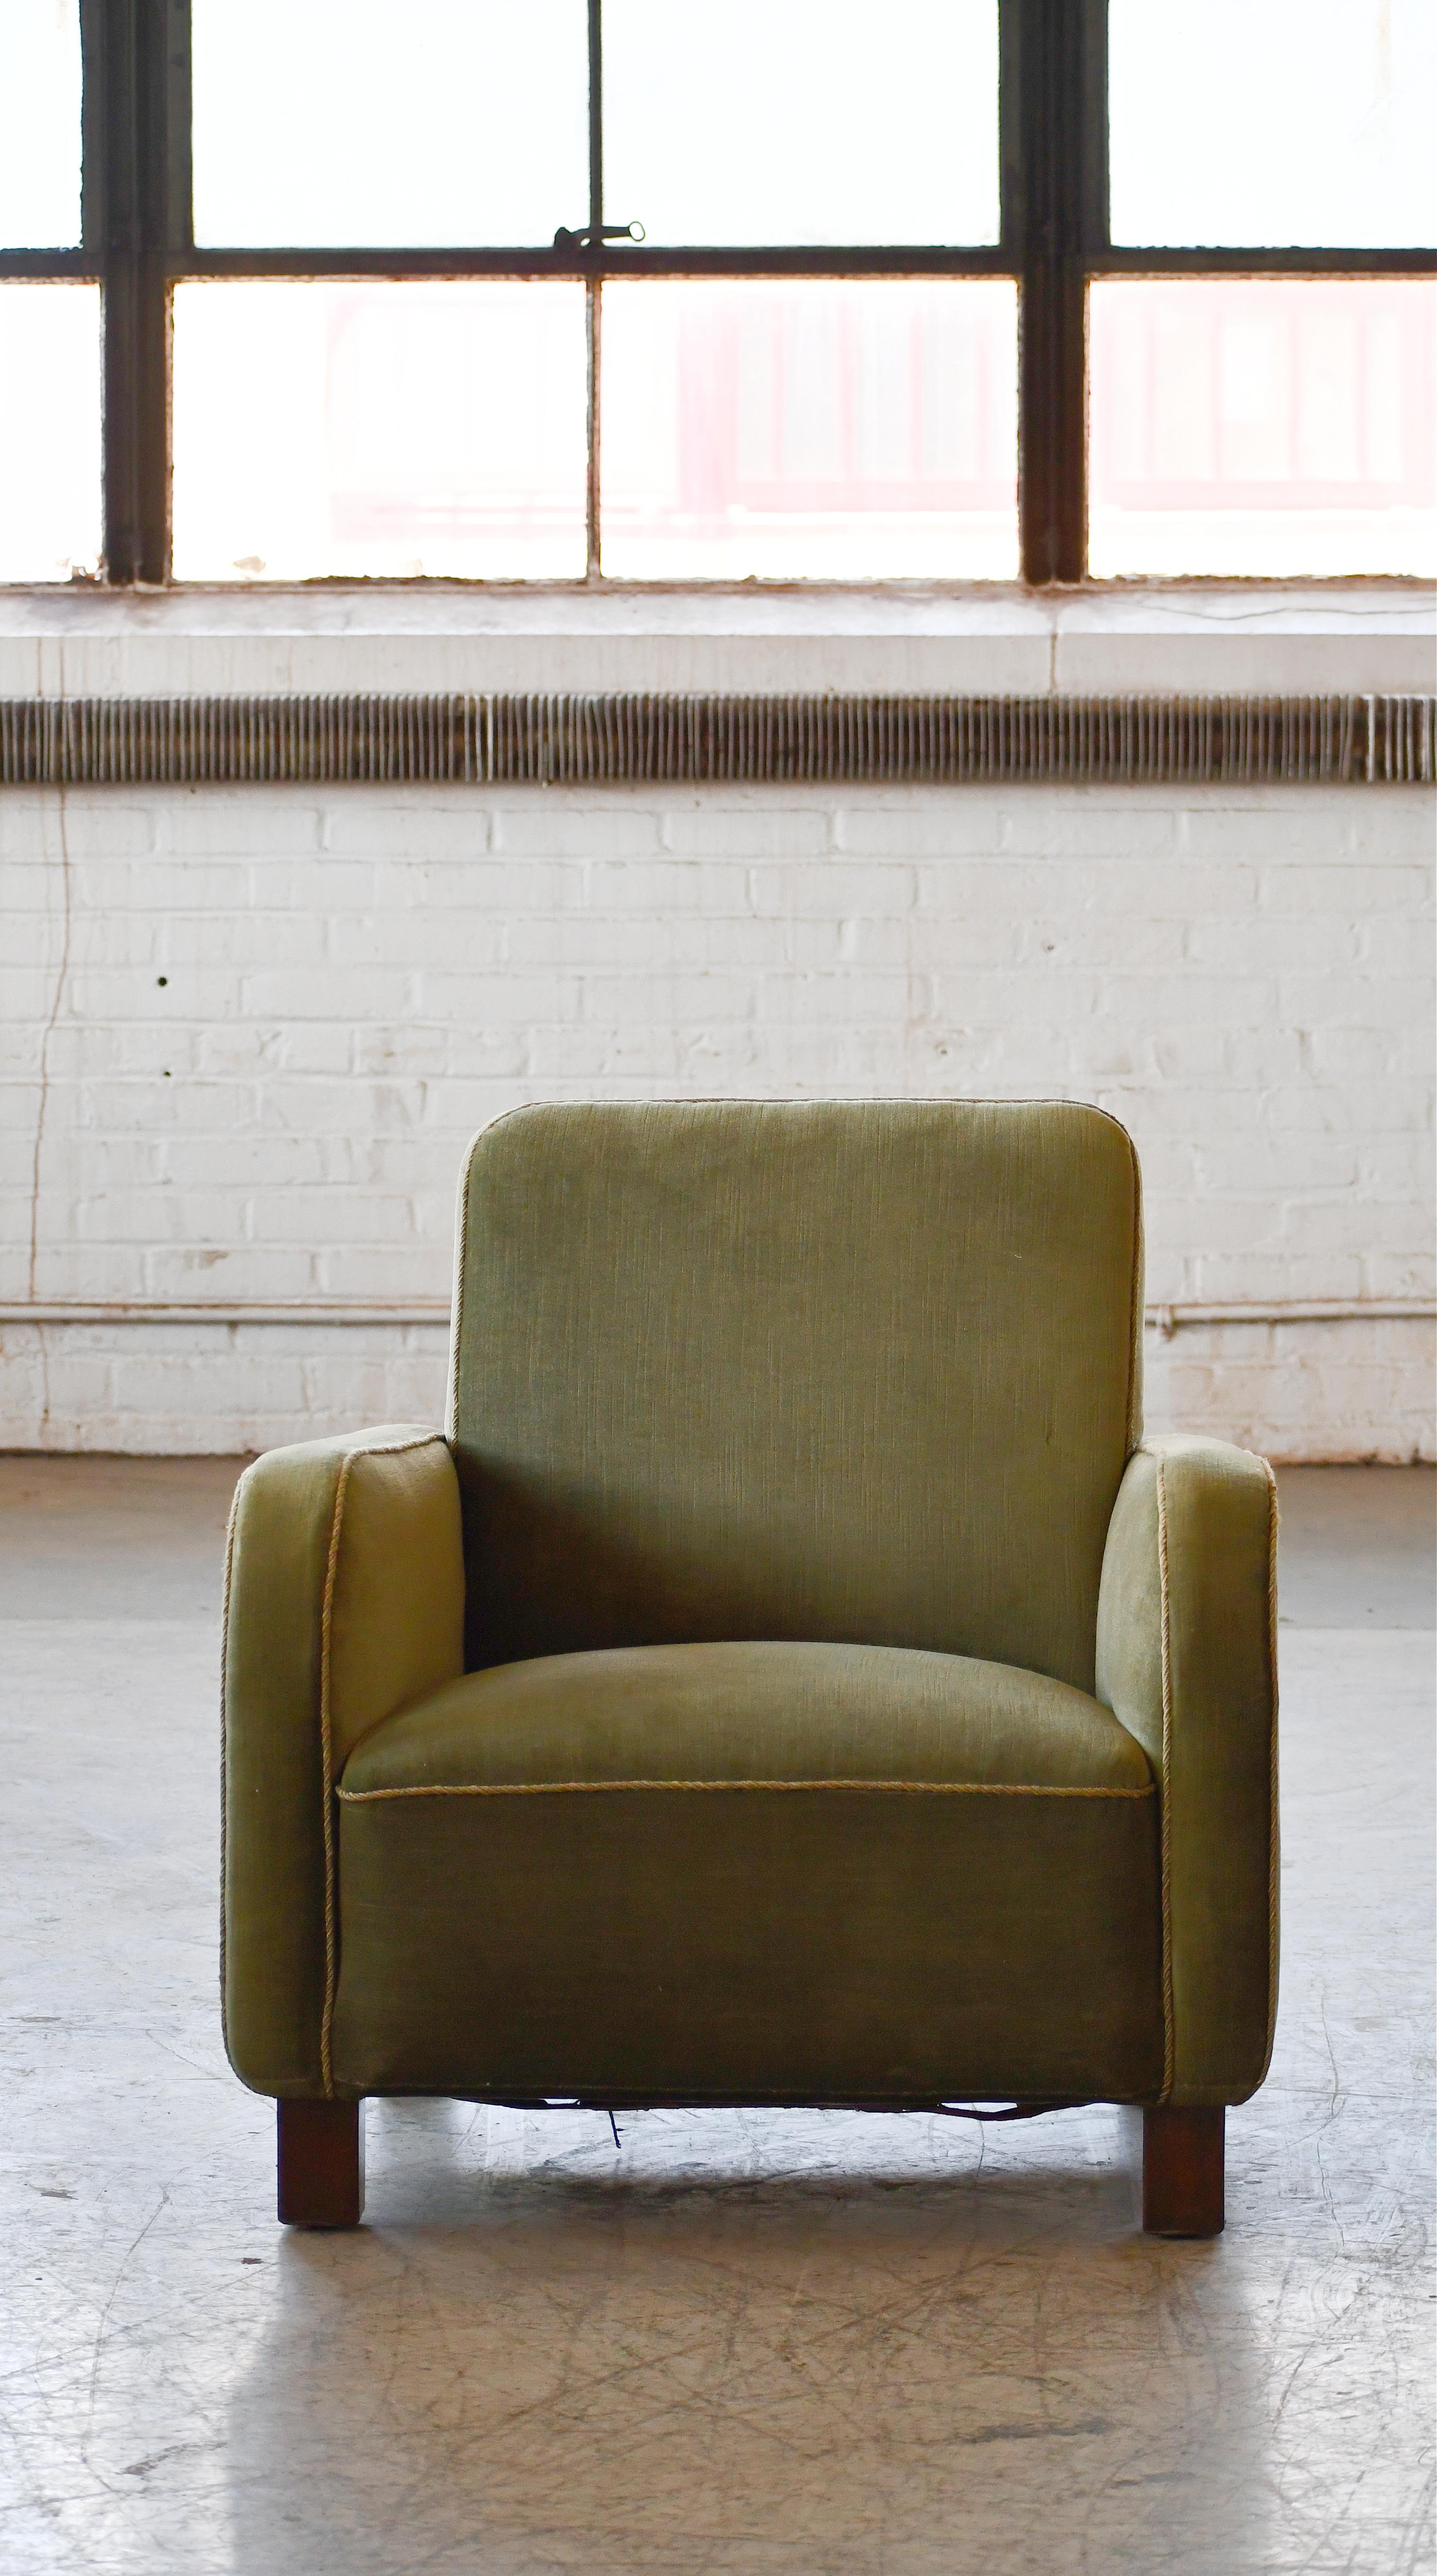 Curvy and eye-catching Danish club chair from the 1930s or 1940s. Set on mahogany feet the design is typical of the art 